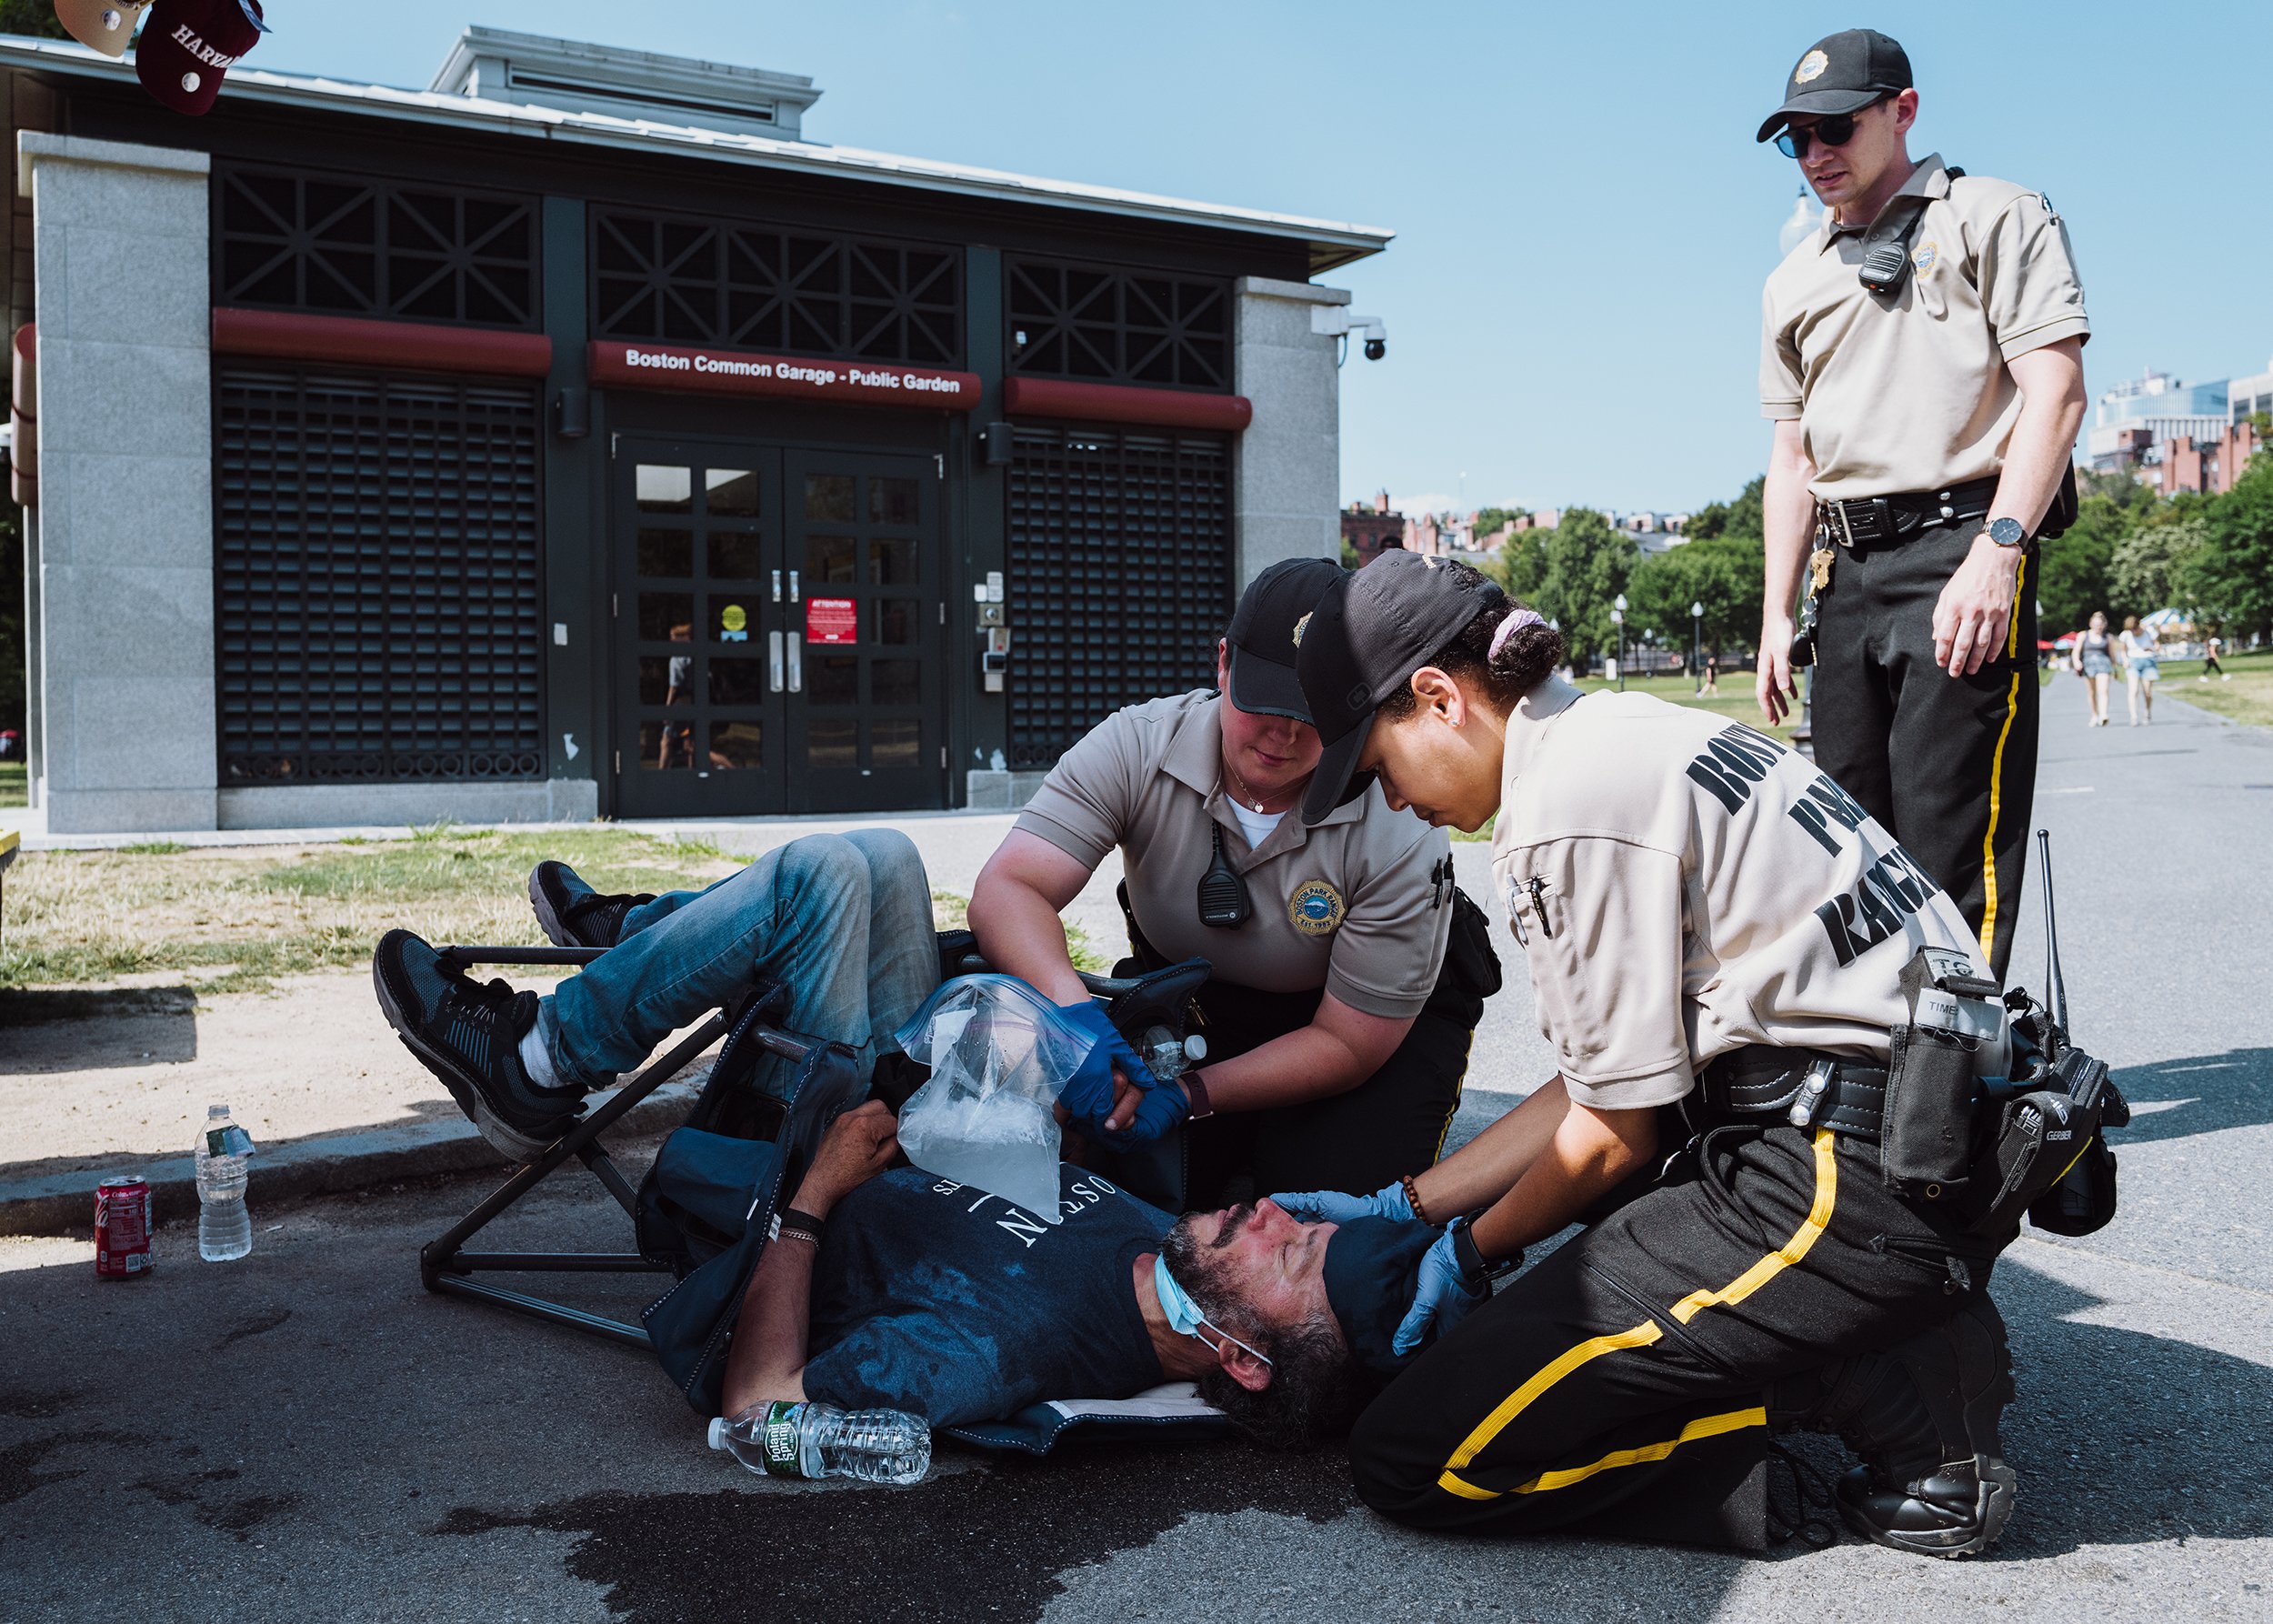  Ranger Emily Wright (center) and Ranger Simone Joseph (right) respond to a man who collapsed from heat stroke at a souvenir stand in the Boston Common, the second incident of the day, on July 23, 2022. Temperatures reached into the high 90’s, increa